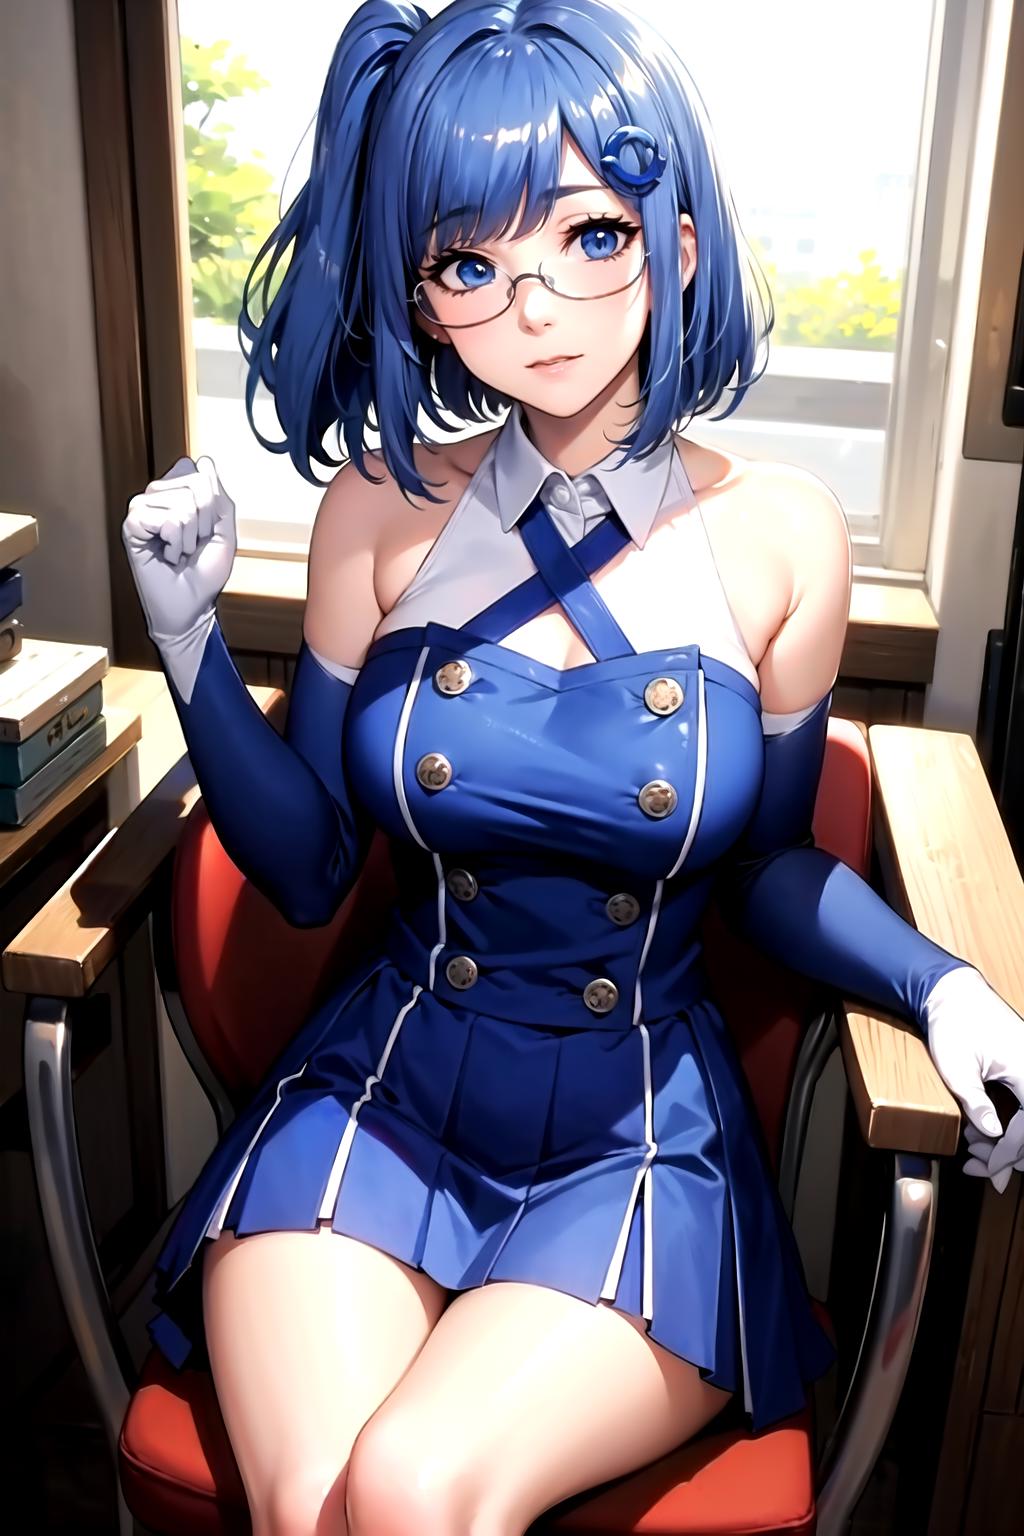 Internet Explorer Chan | Personified Web Browsers image by wrench1815